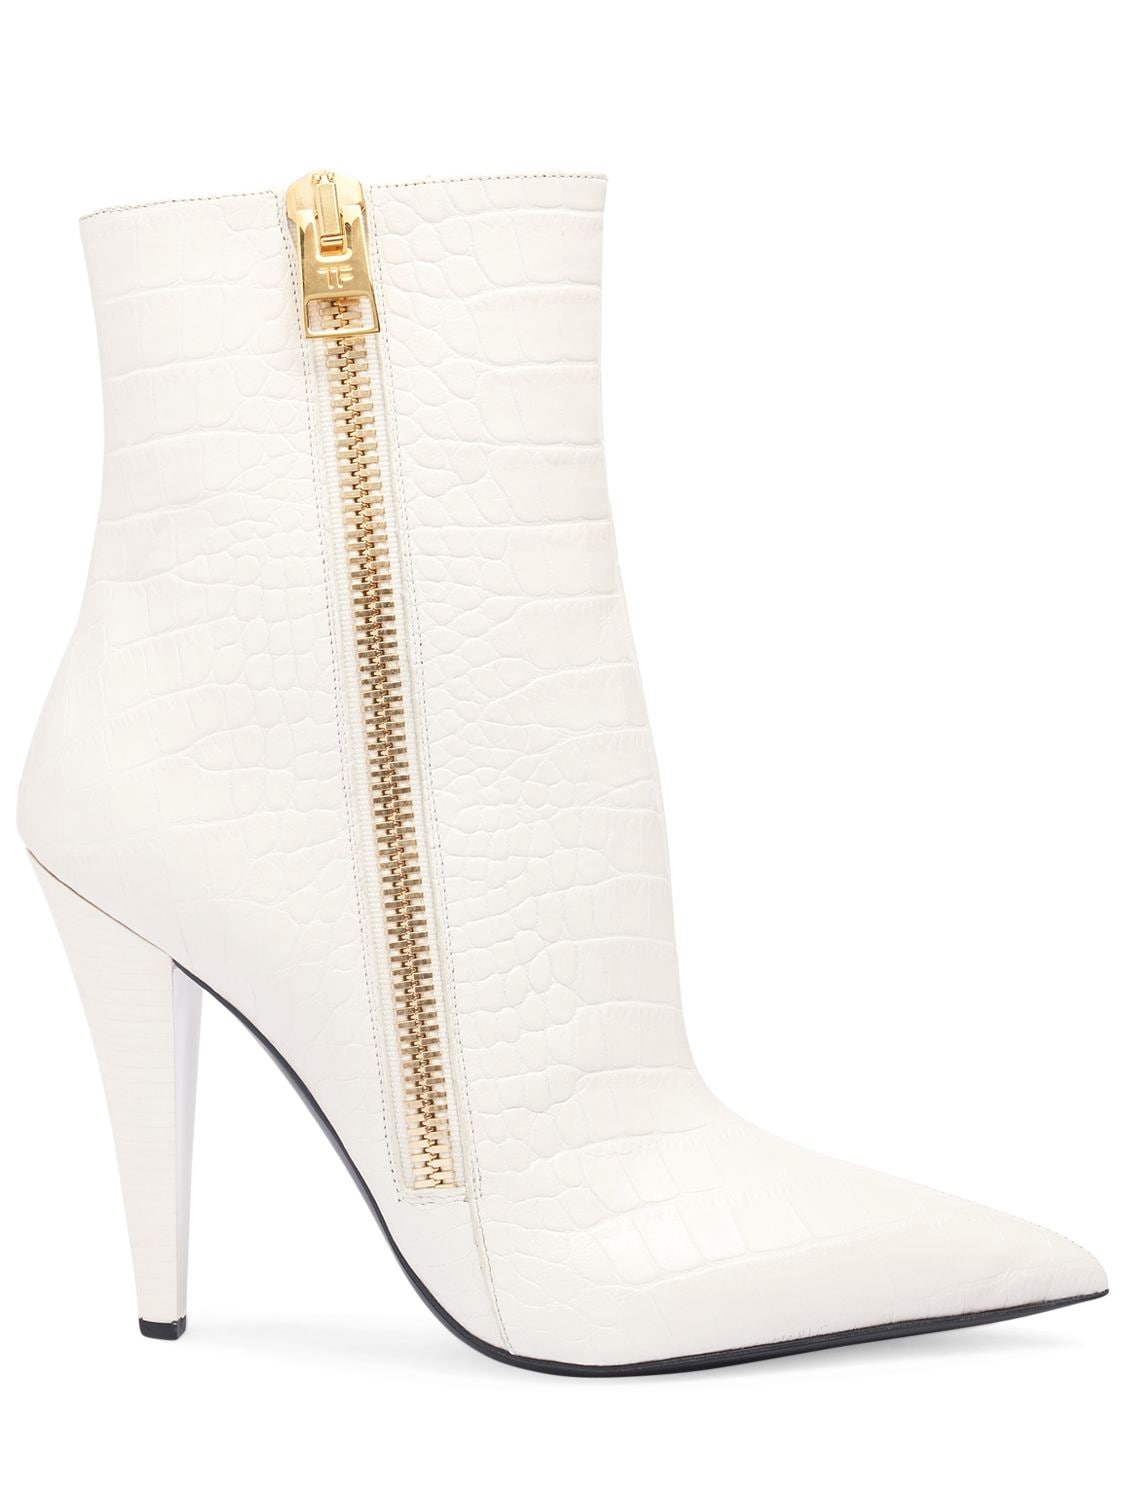 TOM FORD 105MM CROC EMBOSSED ANKLE BOOTS